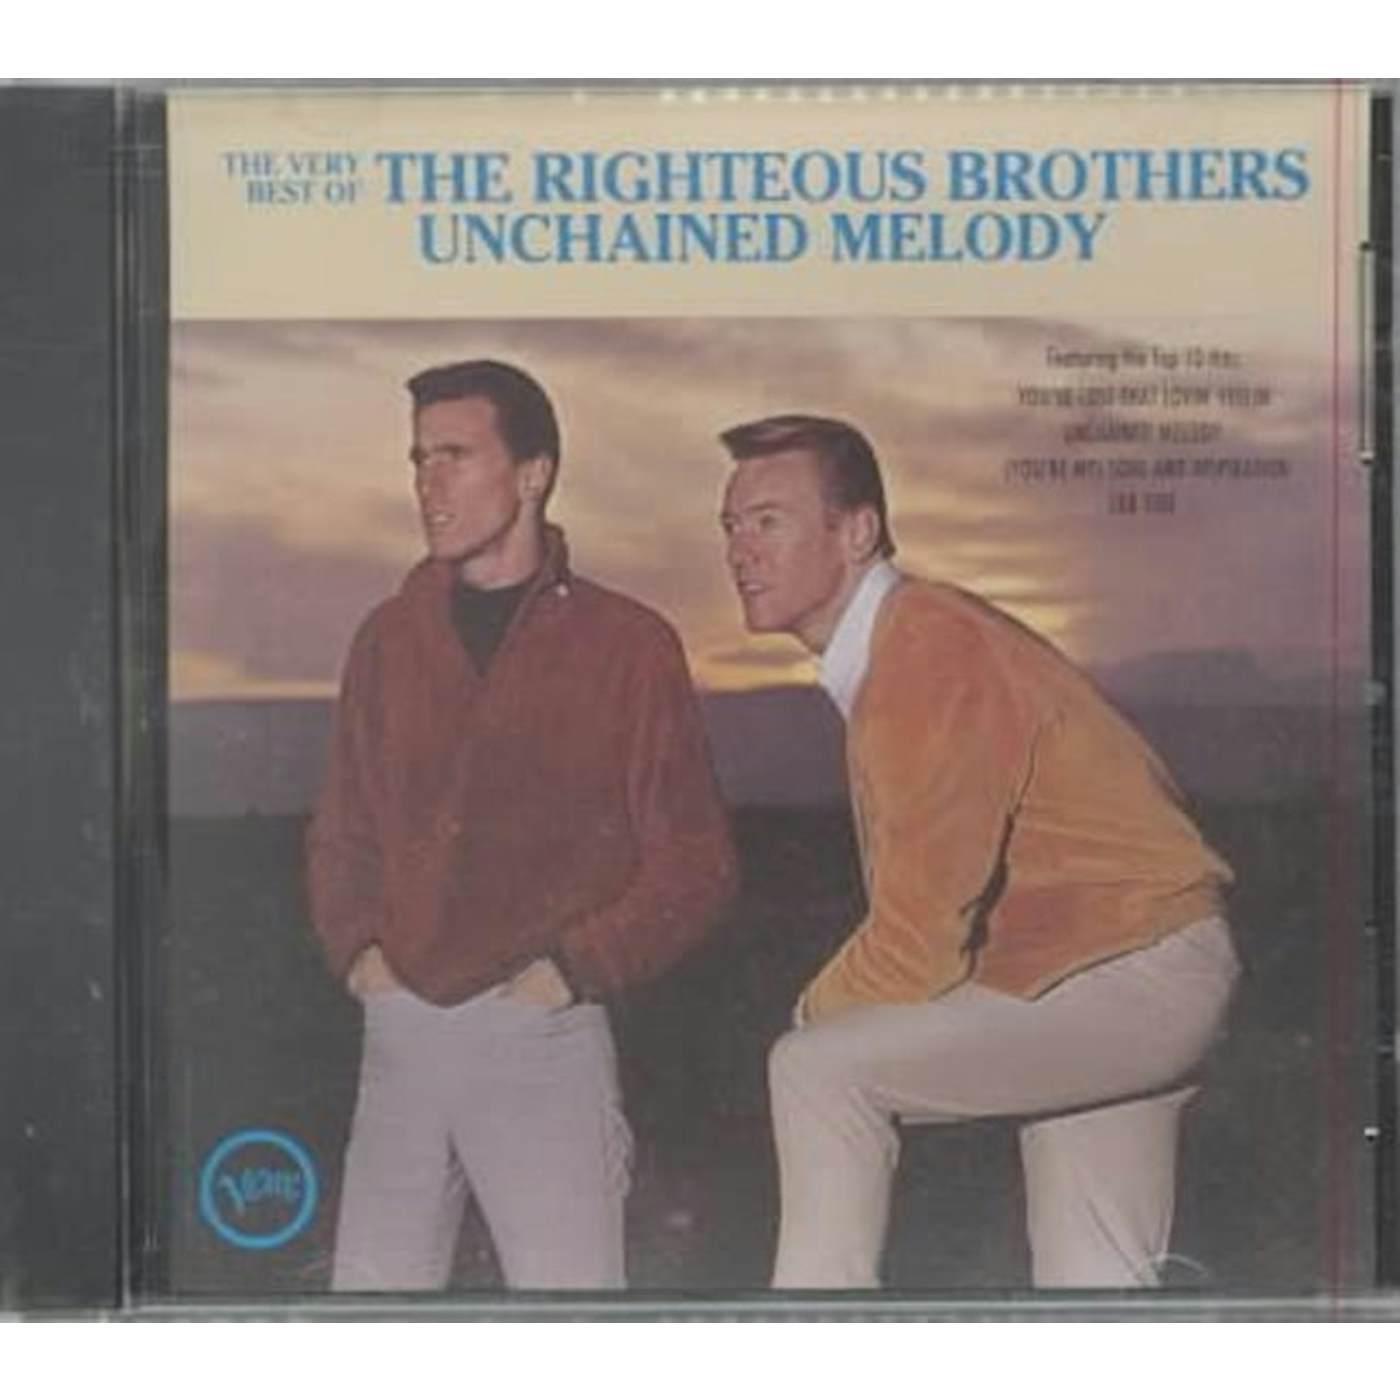 The Righteous Brothers CD - The Very Best Of - Unchained Melody